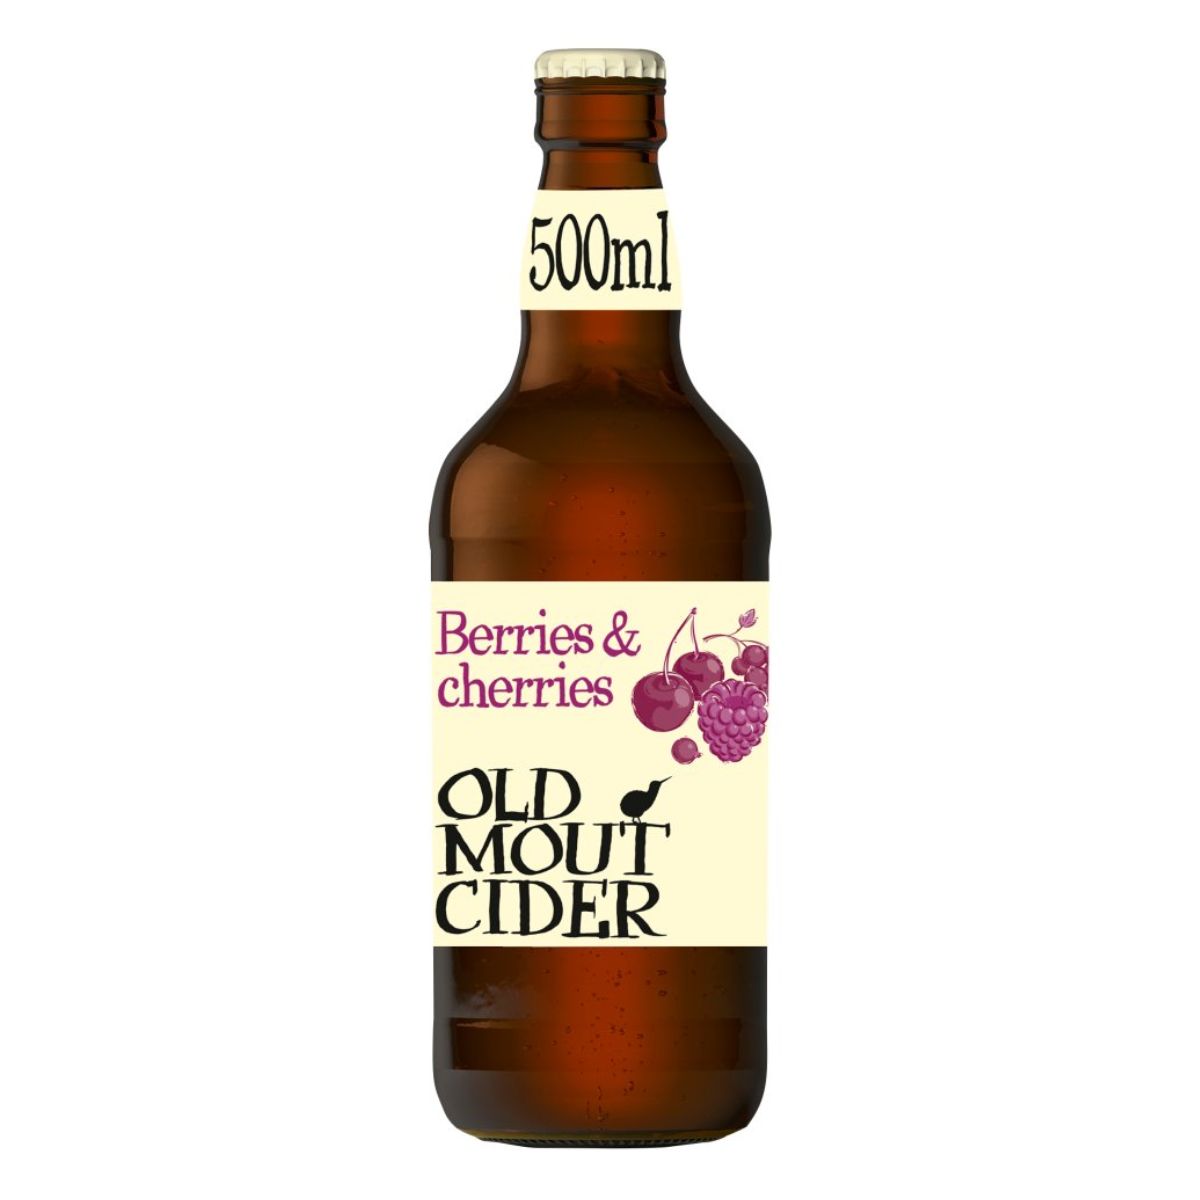 A bottle of Old Mout Cider - Berries & Cherries (4.0% ABV) - 500ml cider.